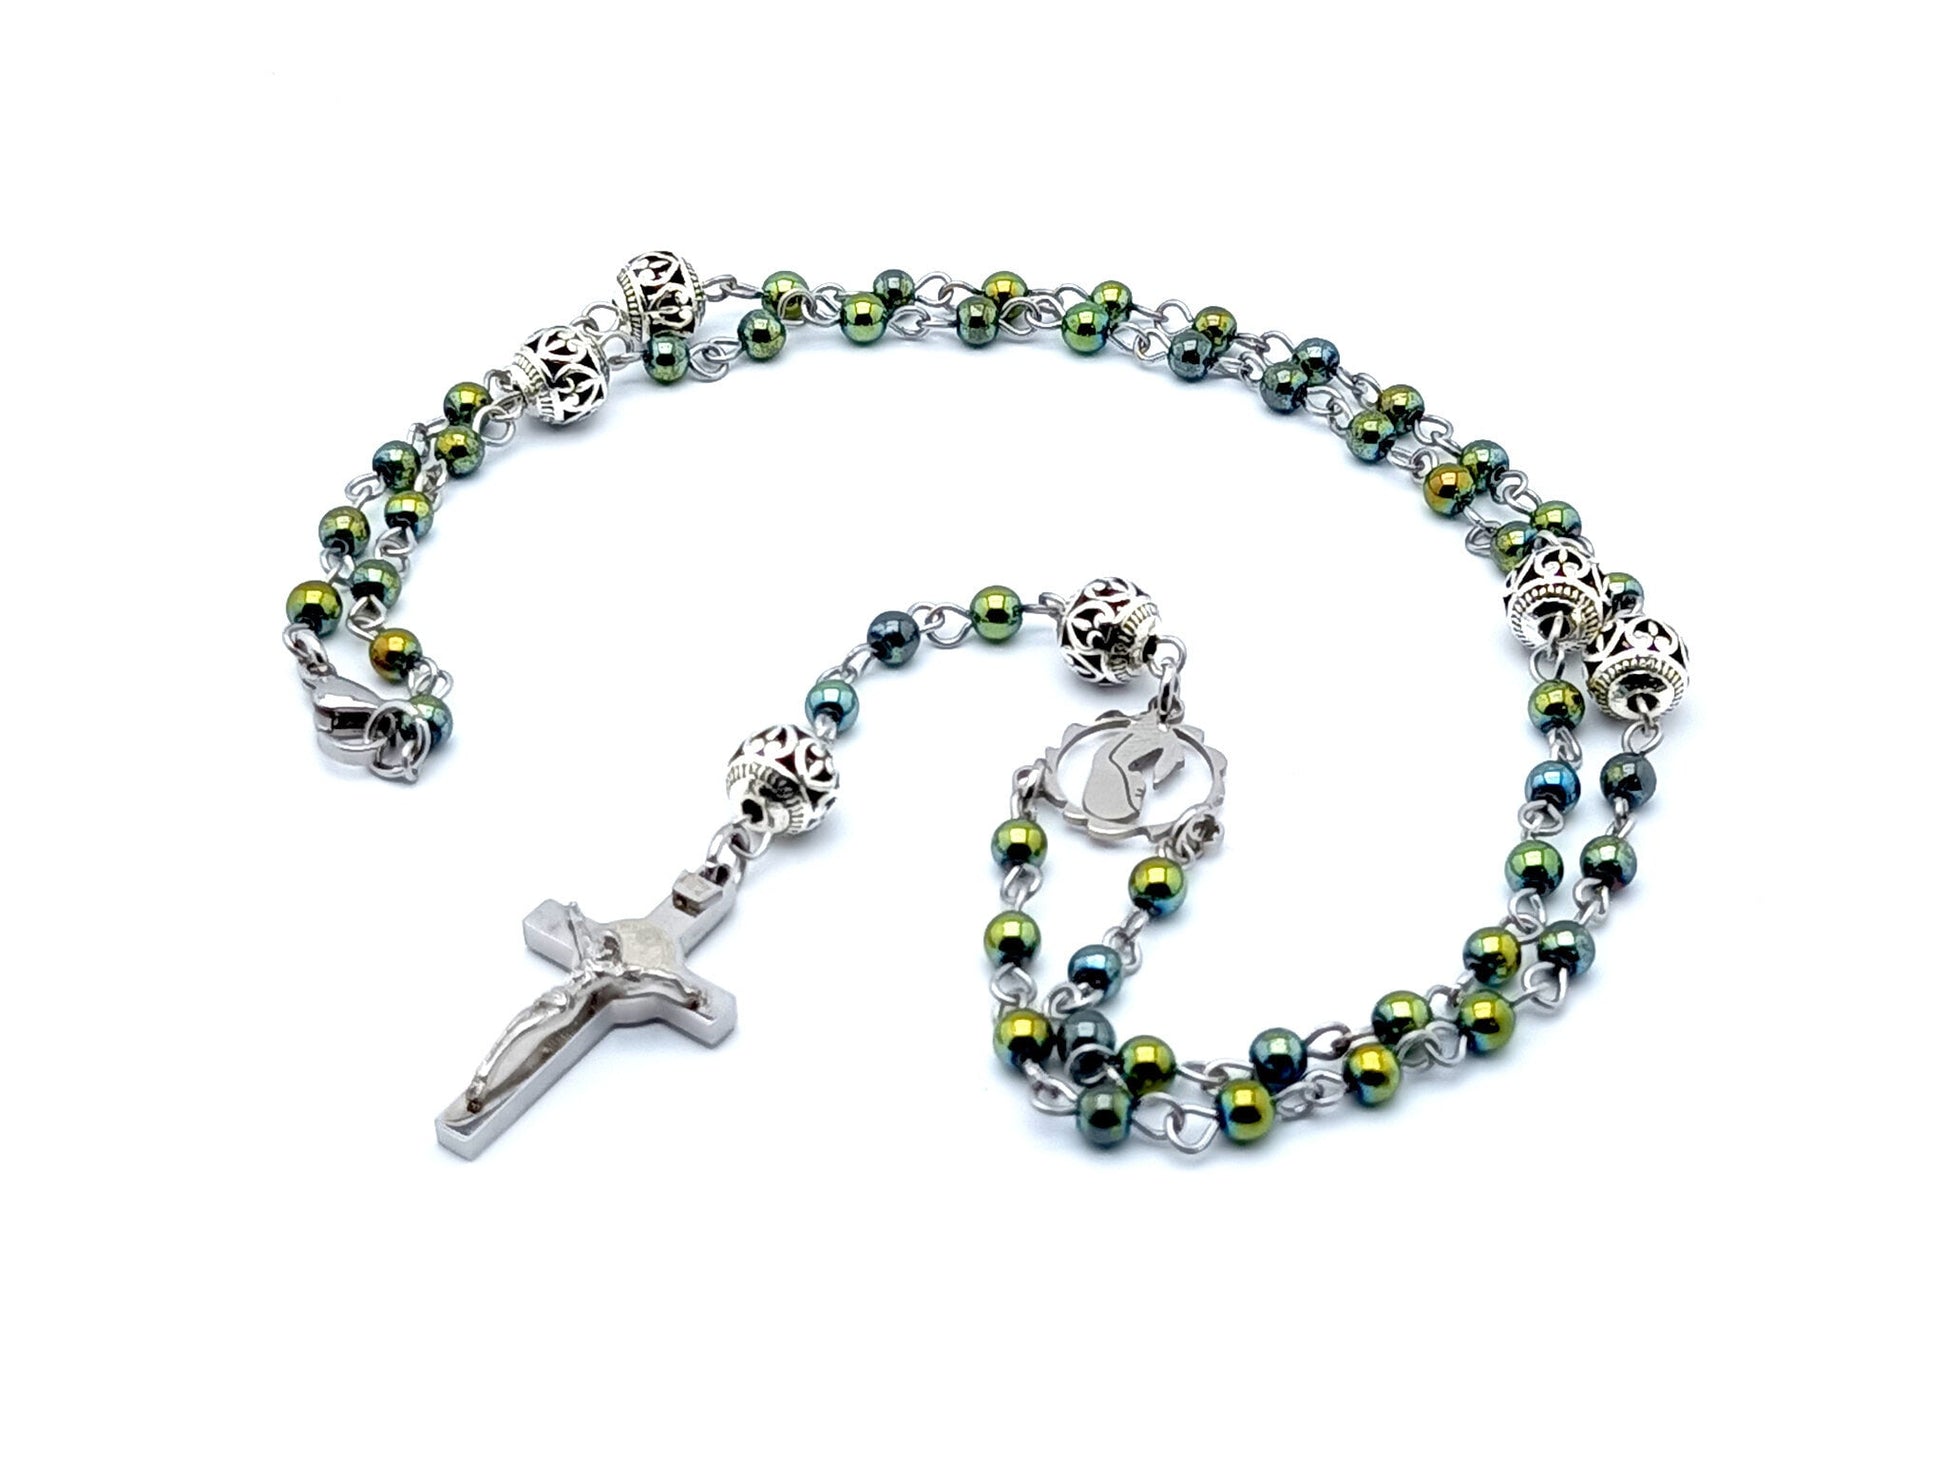 Miniature Virgin Mary unique rosary beads necklace with hematite gemstone beads and stainless steel crucifix.